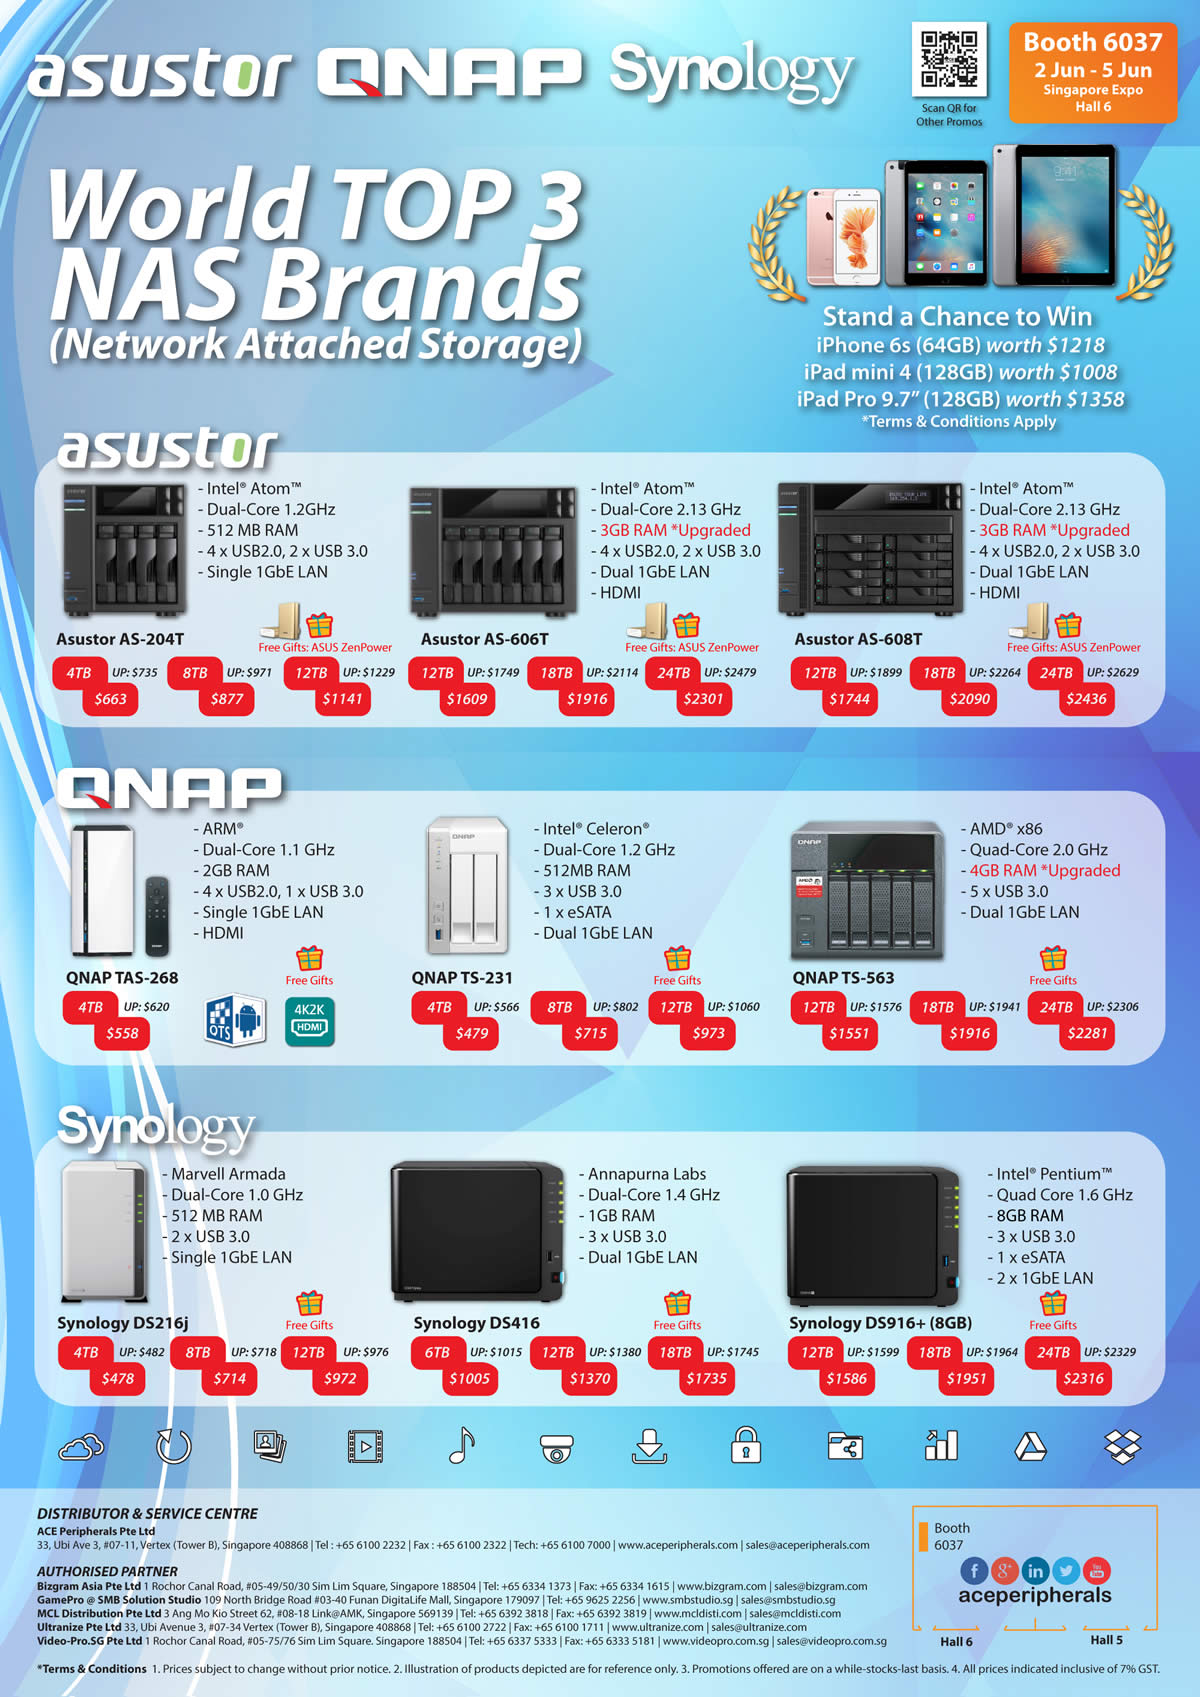 PC SHOW 2016 price list image brochure of ACE Peripherals Asustor NAS QNAP, Synology, Asustor AS-204T, 606T, 608T, Qnap TAS-268, TS-231, TS-563, Synology DS216j, DS416, DS916 Plus